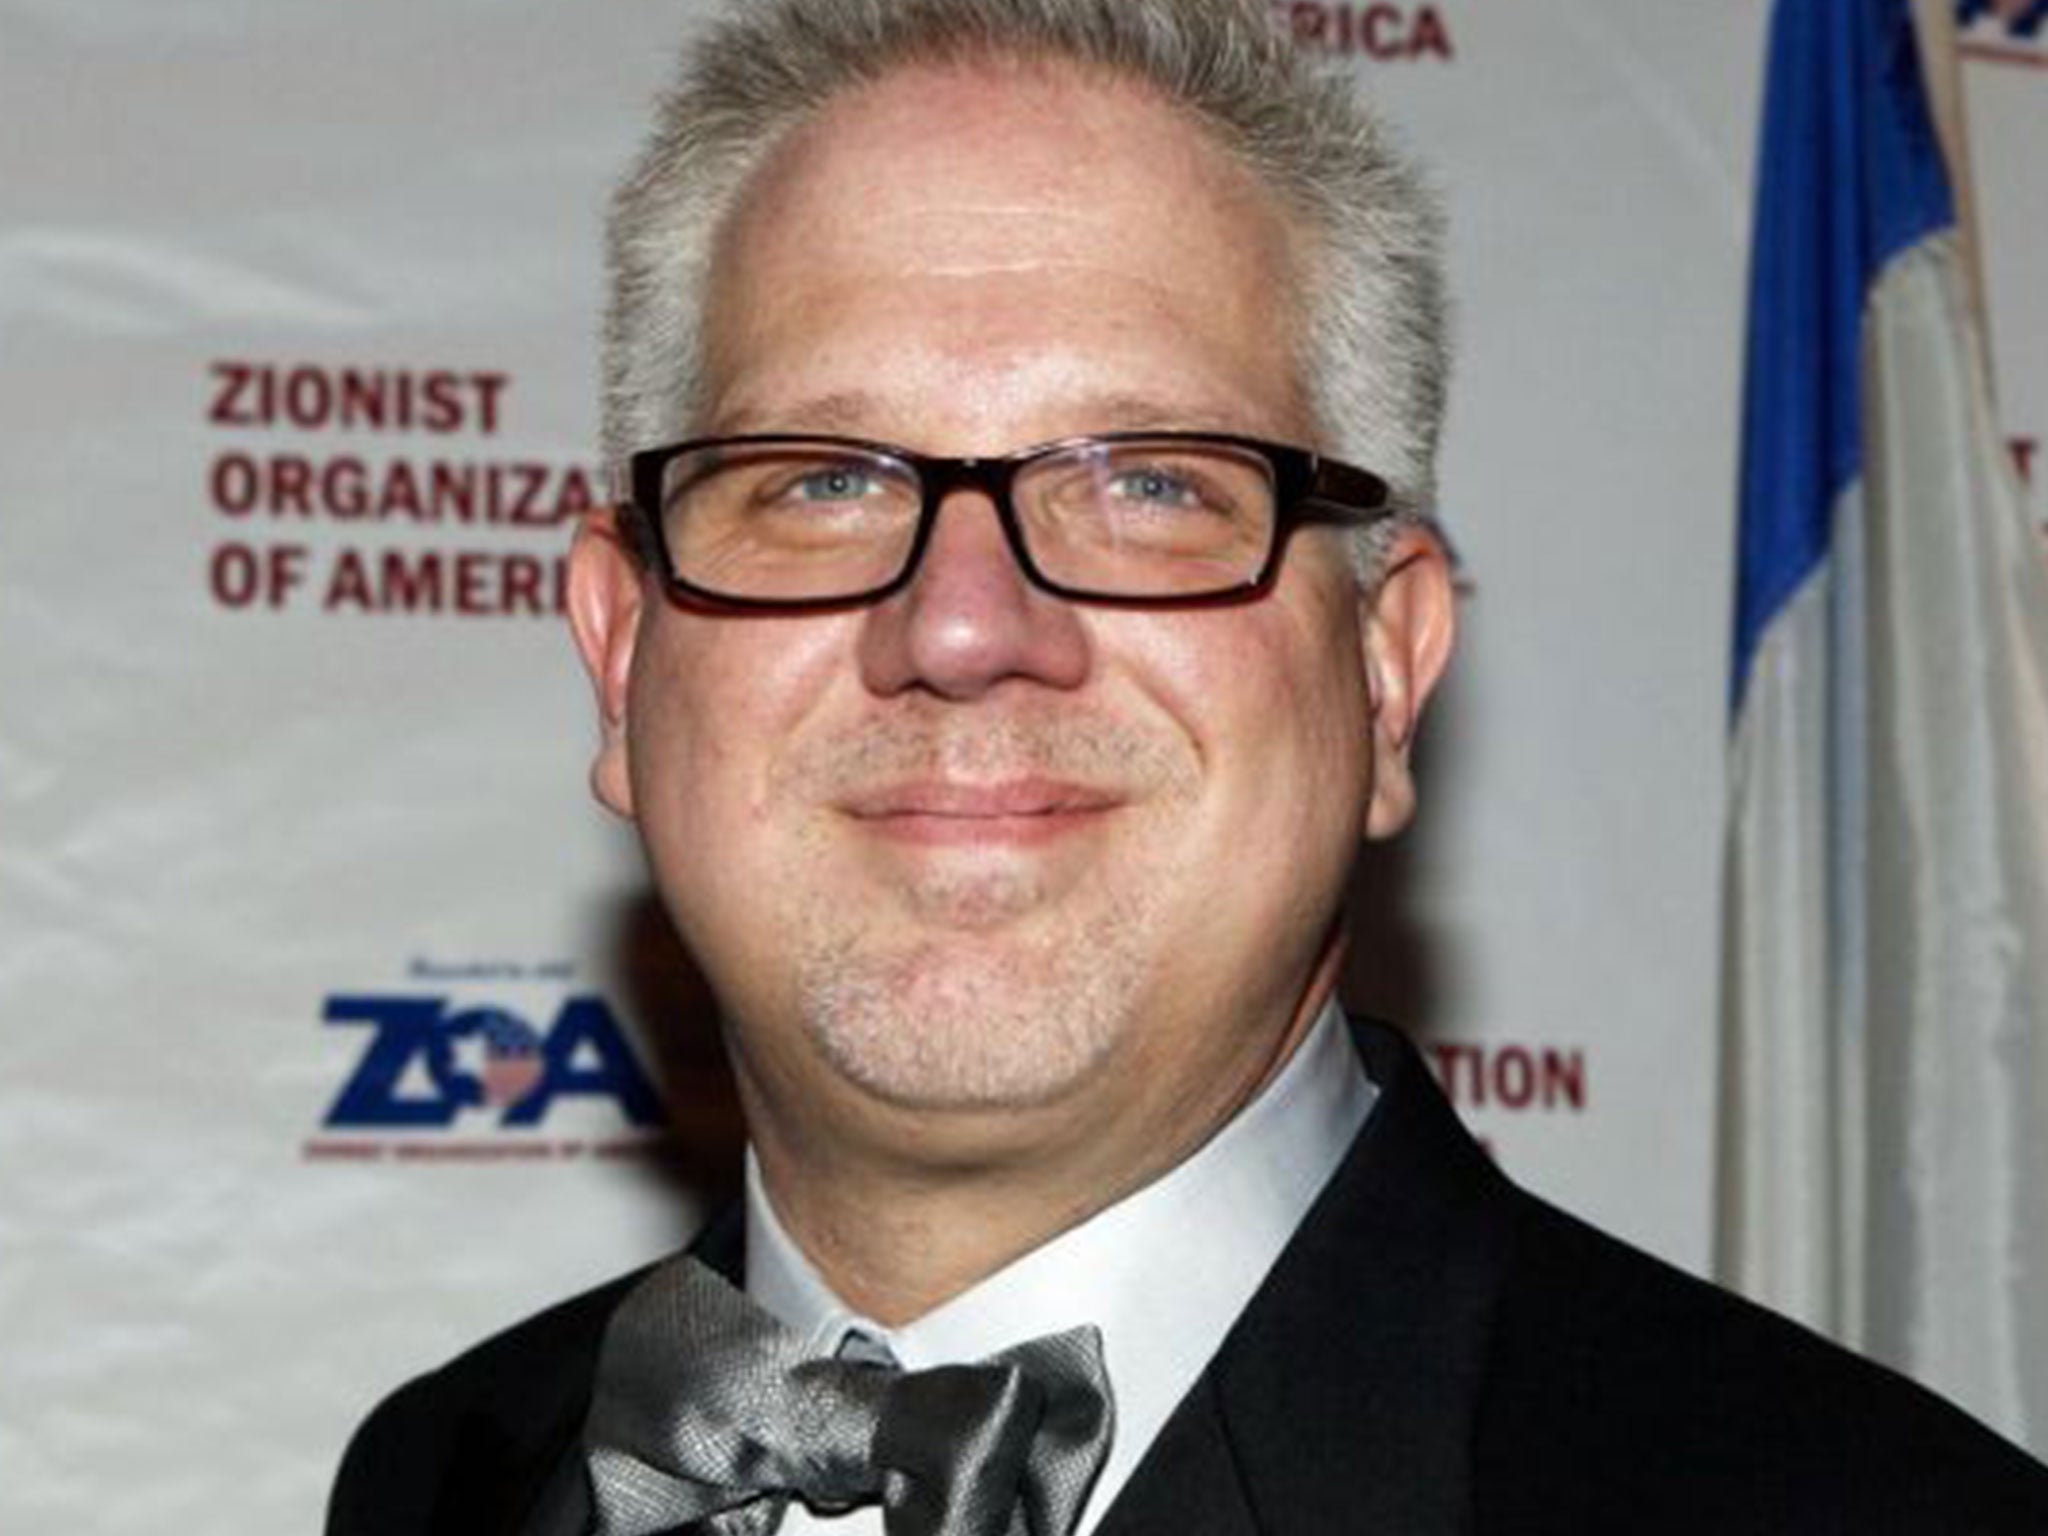 Glenn Beck is being sued for defamation